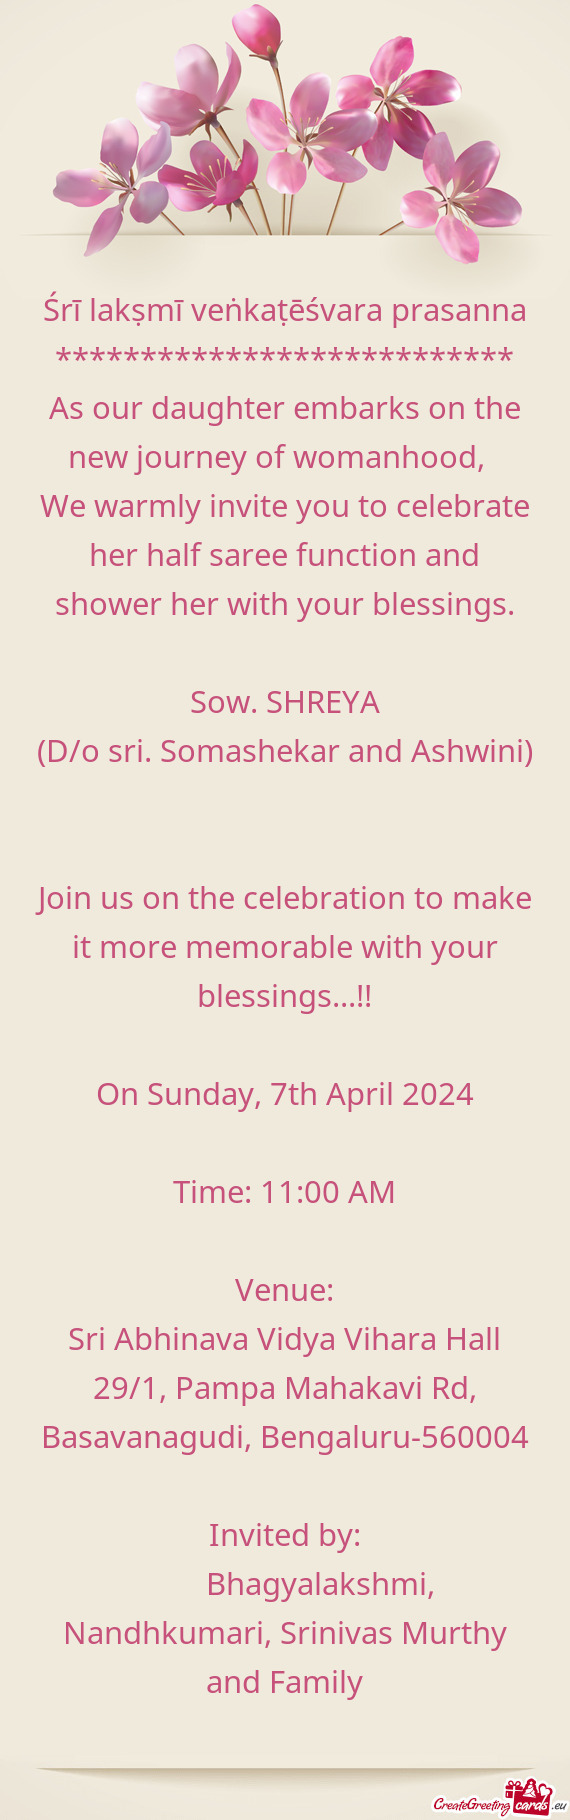 We warmly invite you to celebrate her half saree function and shower her with your blessings